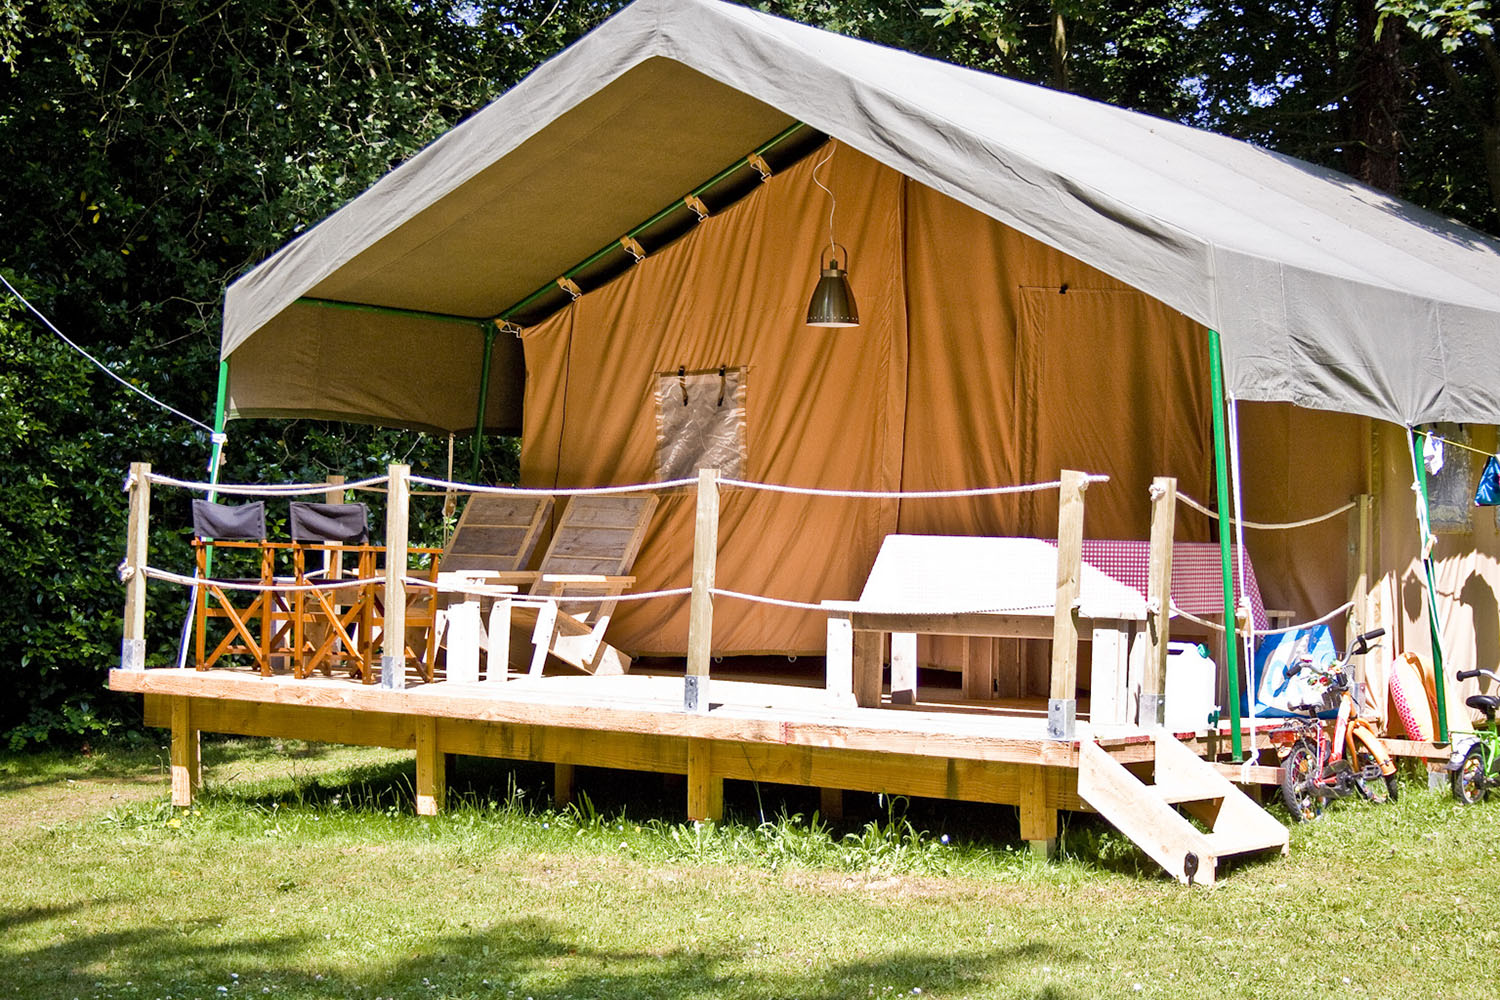 Safari tents, for 2 to 5 people